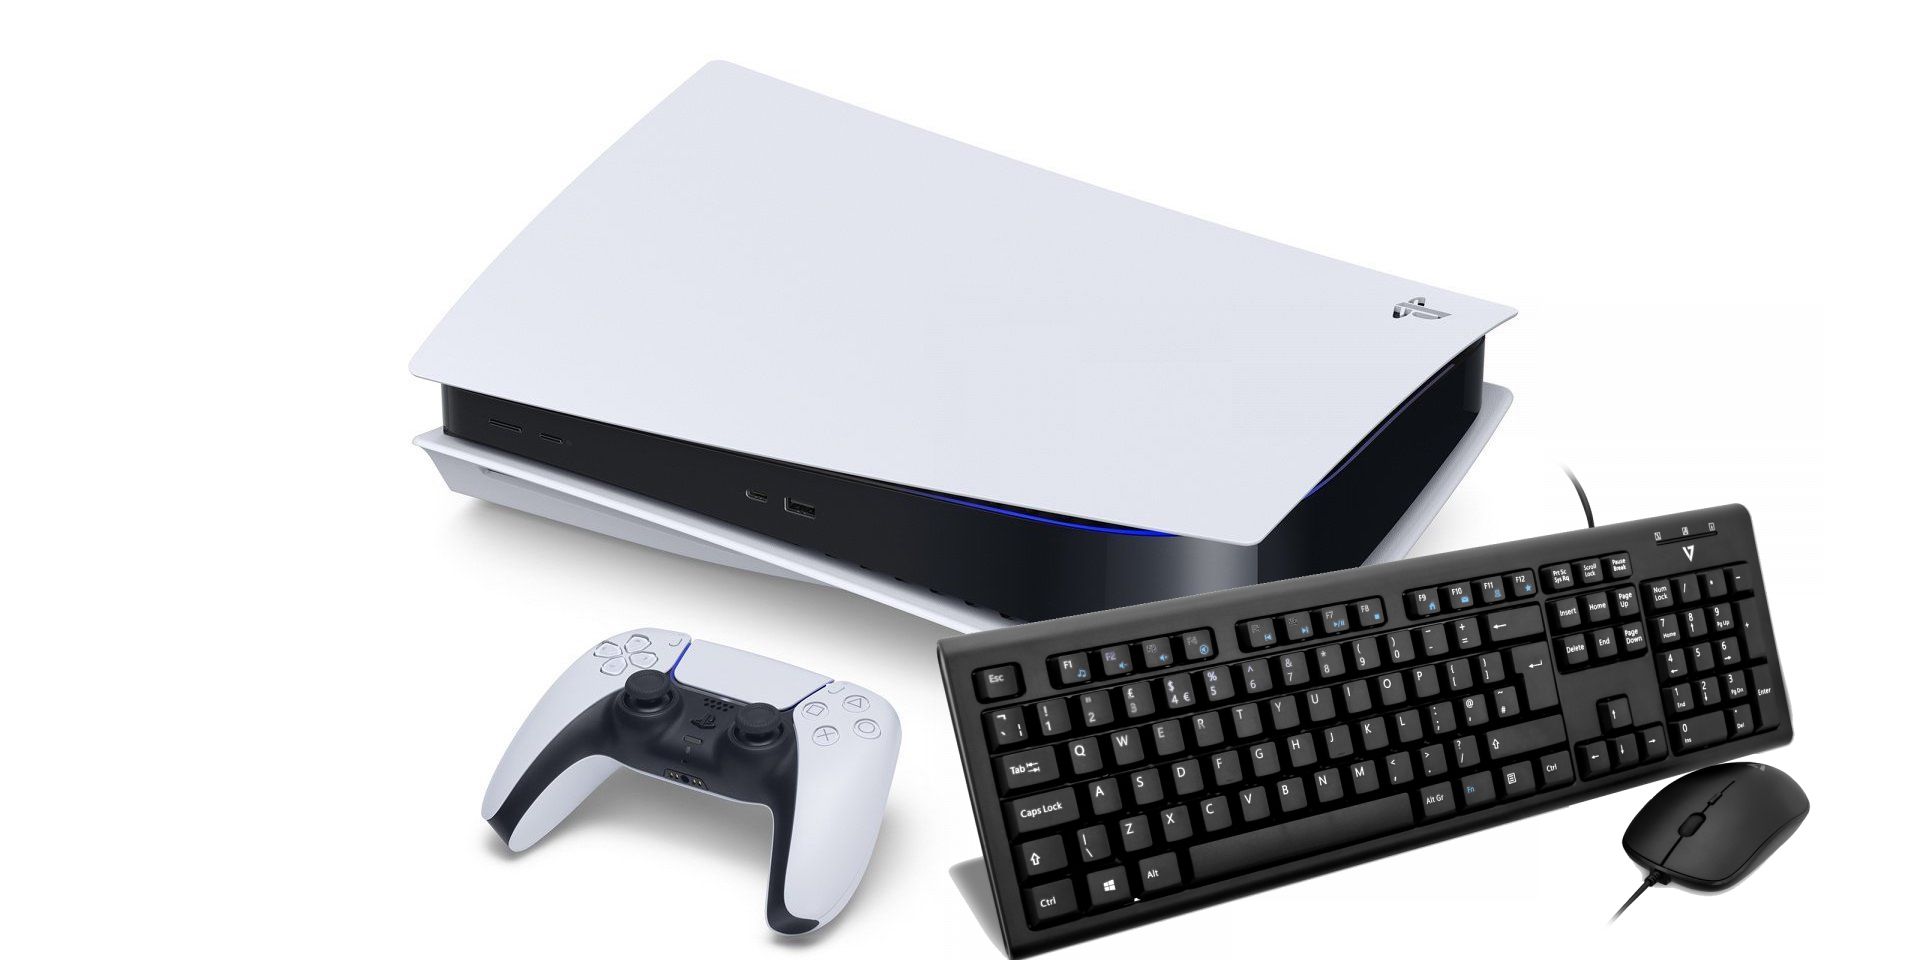 ps4 games keyboard mouse support